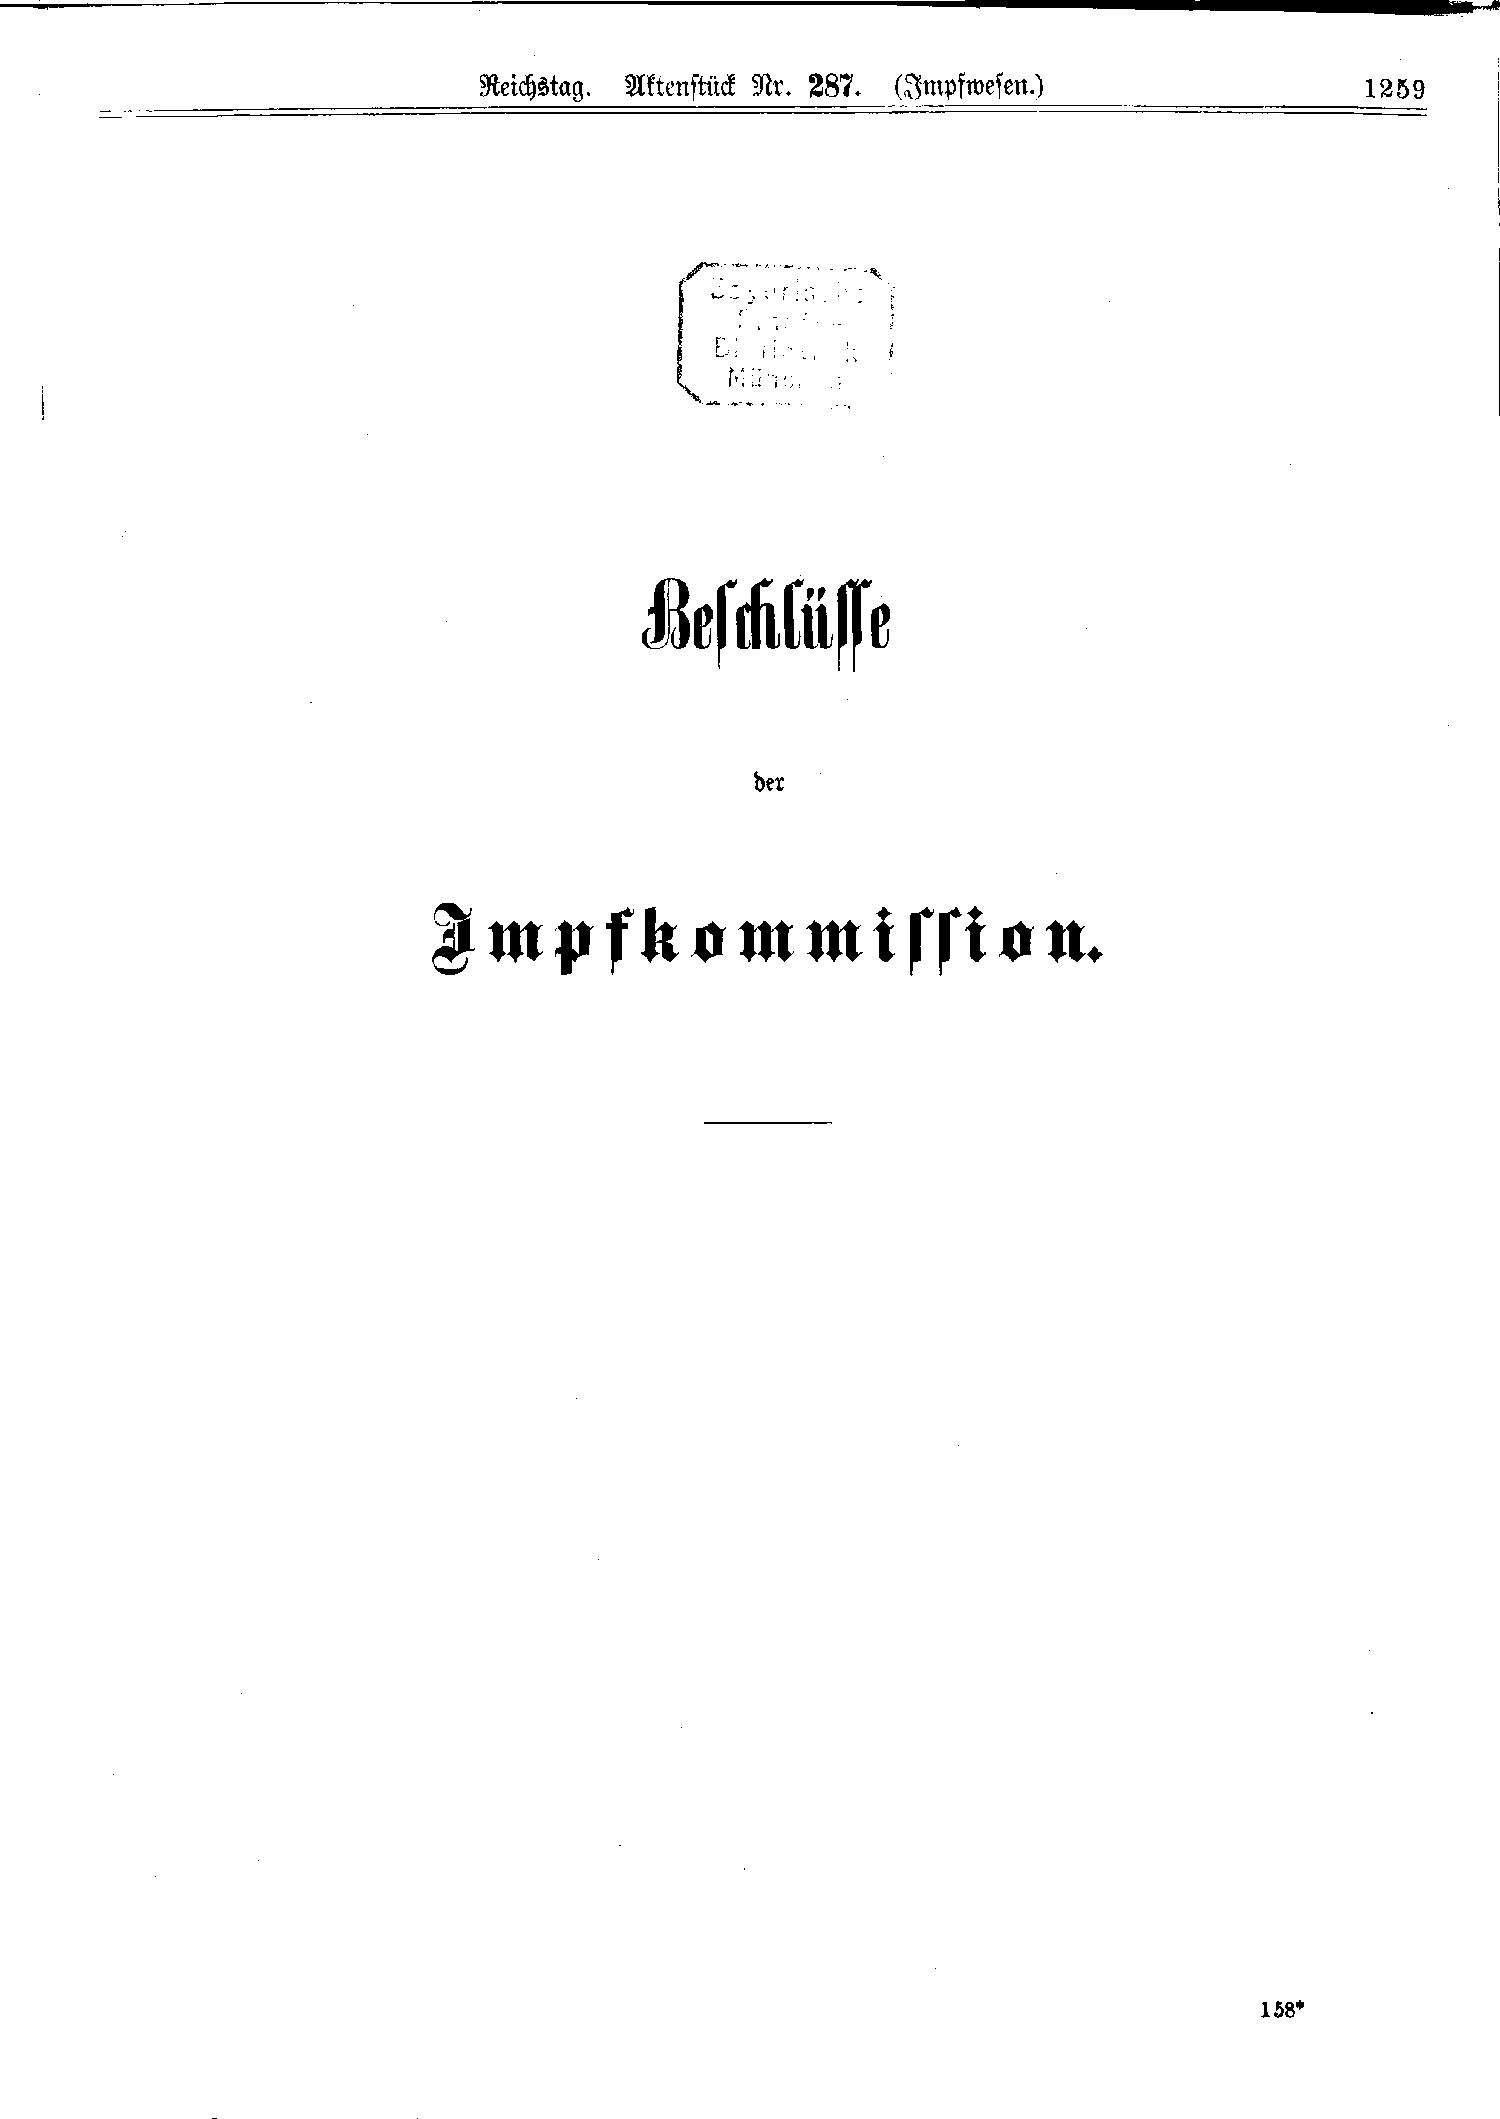 Scan of page 1259